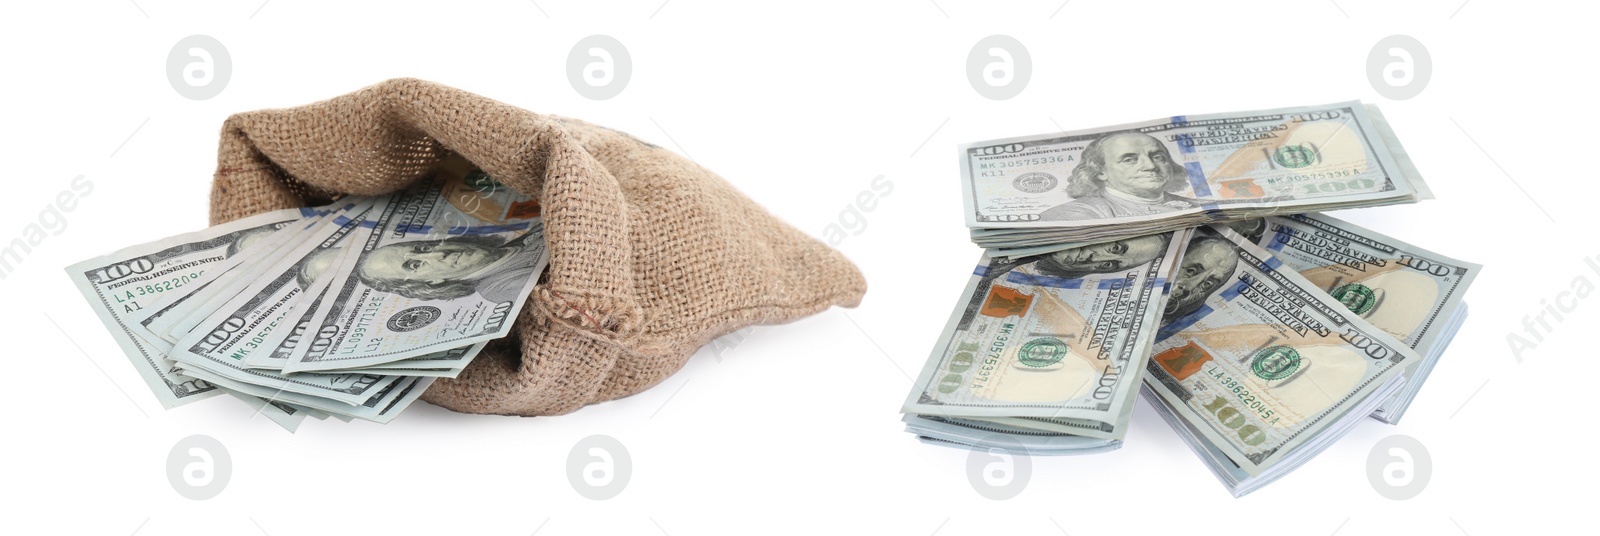 Image of Sack and money on white background. American dollars